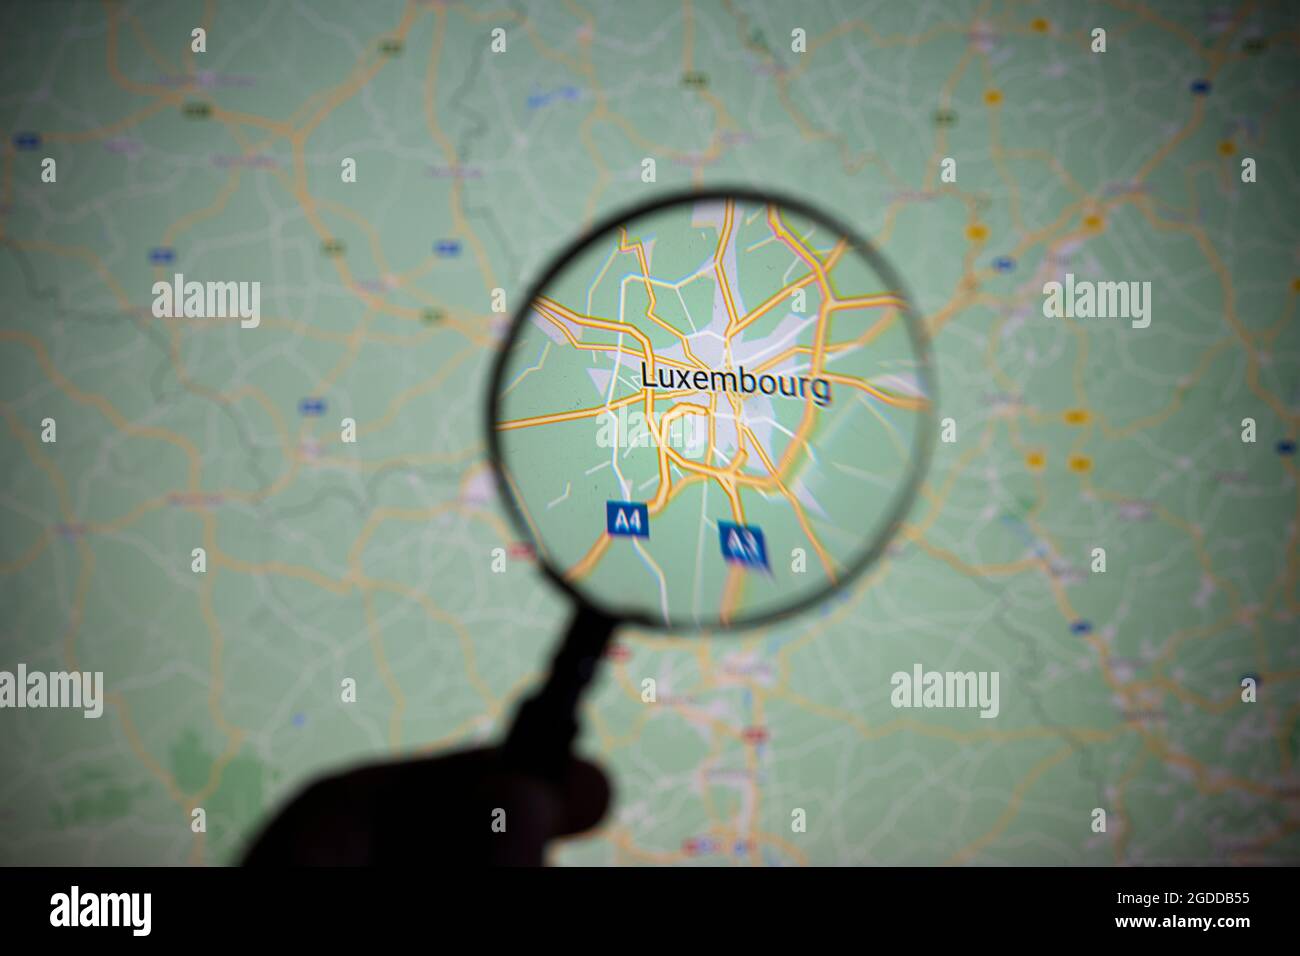 view of the city of Luxembourg through a magnifying glass on Google Maps Stock Photo